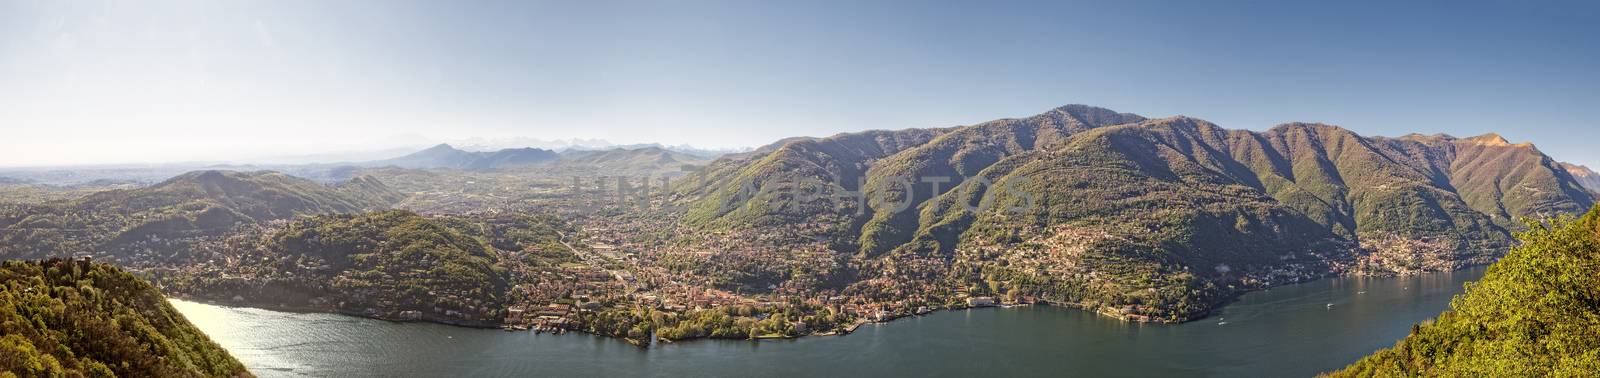 View at Como from Brunate by mot1963